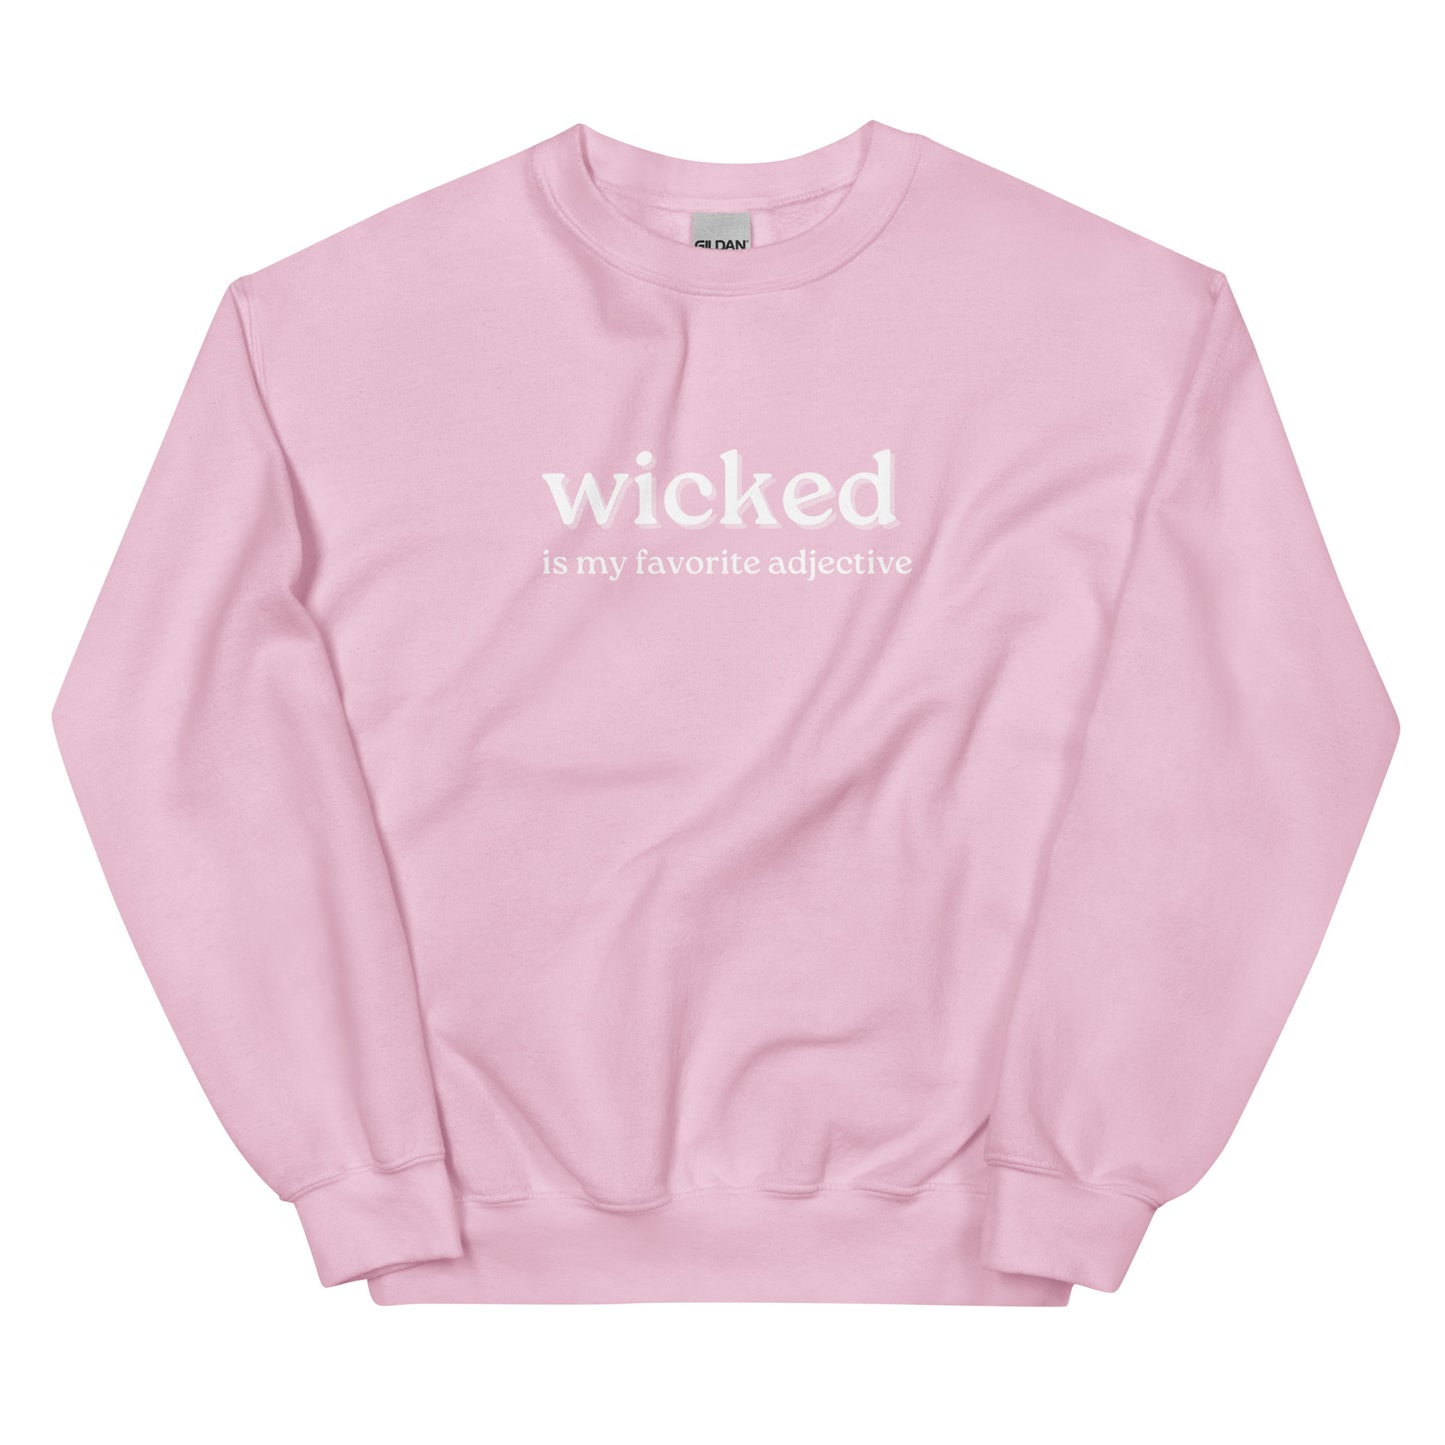 pink crewneck that says "wicked is my favorite adjective" in white lettering